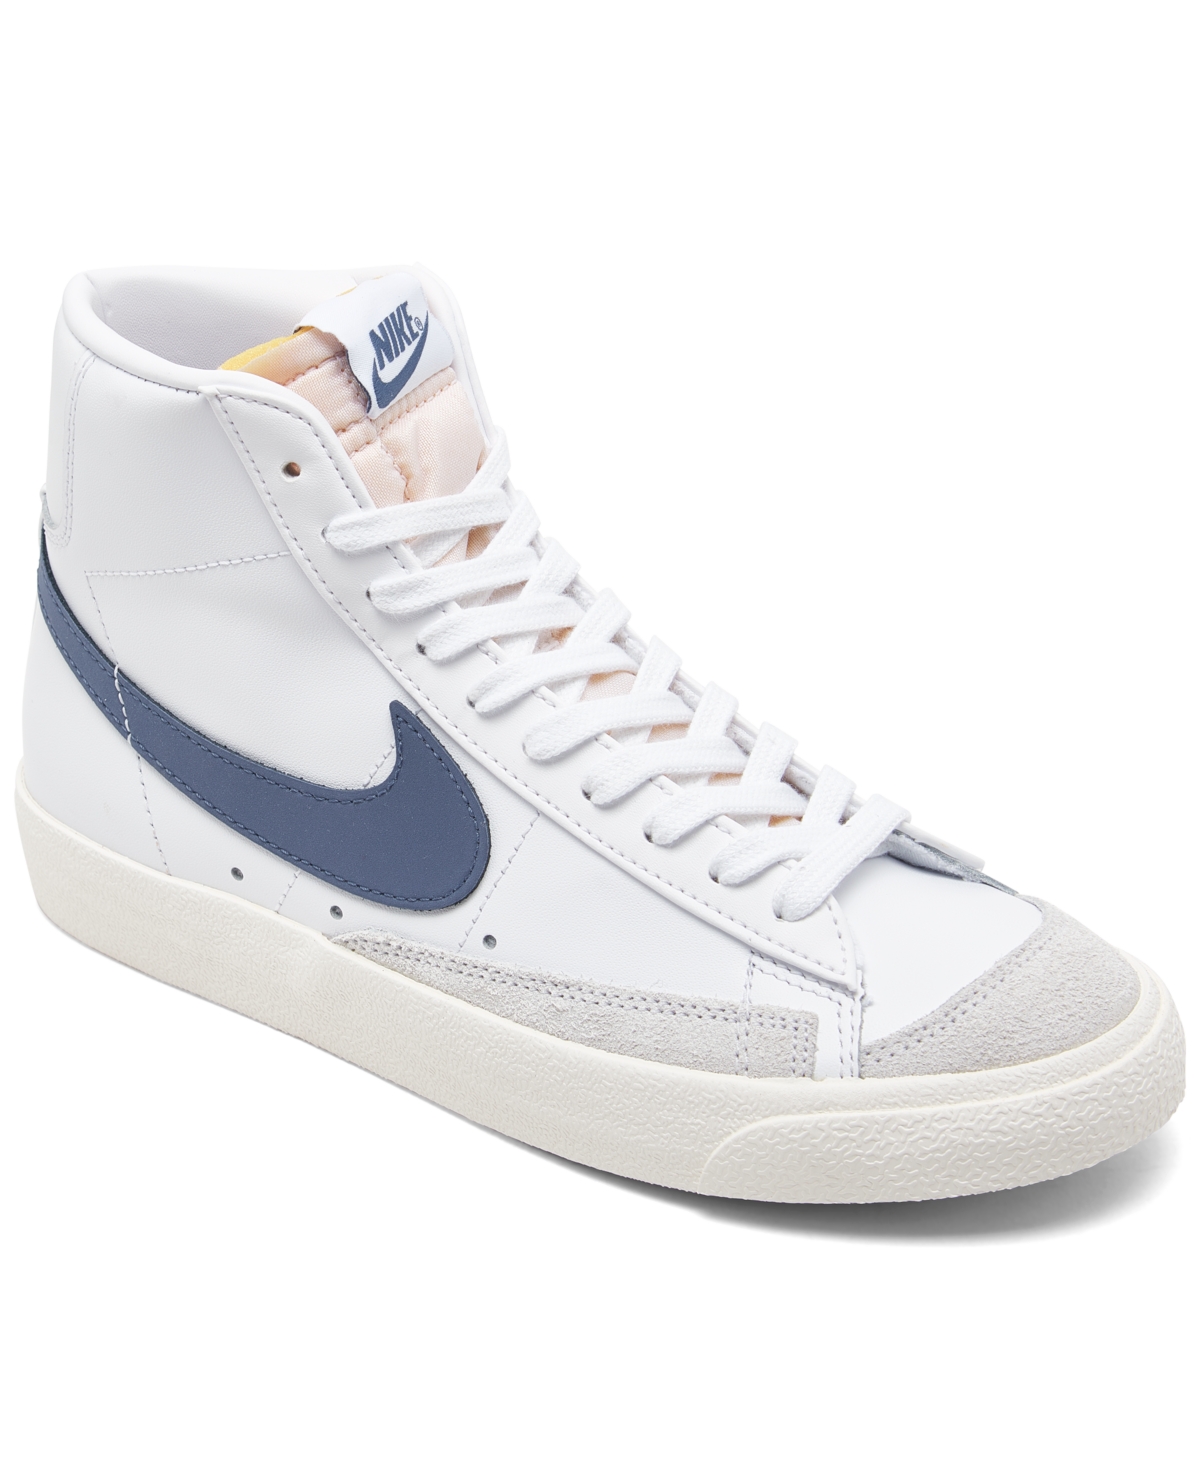 Nike Women's Blazer Mid 77 Casual Sneakers From Finish Line In White/diffused Blue/sail 